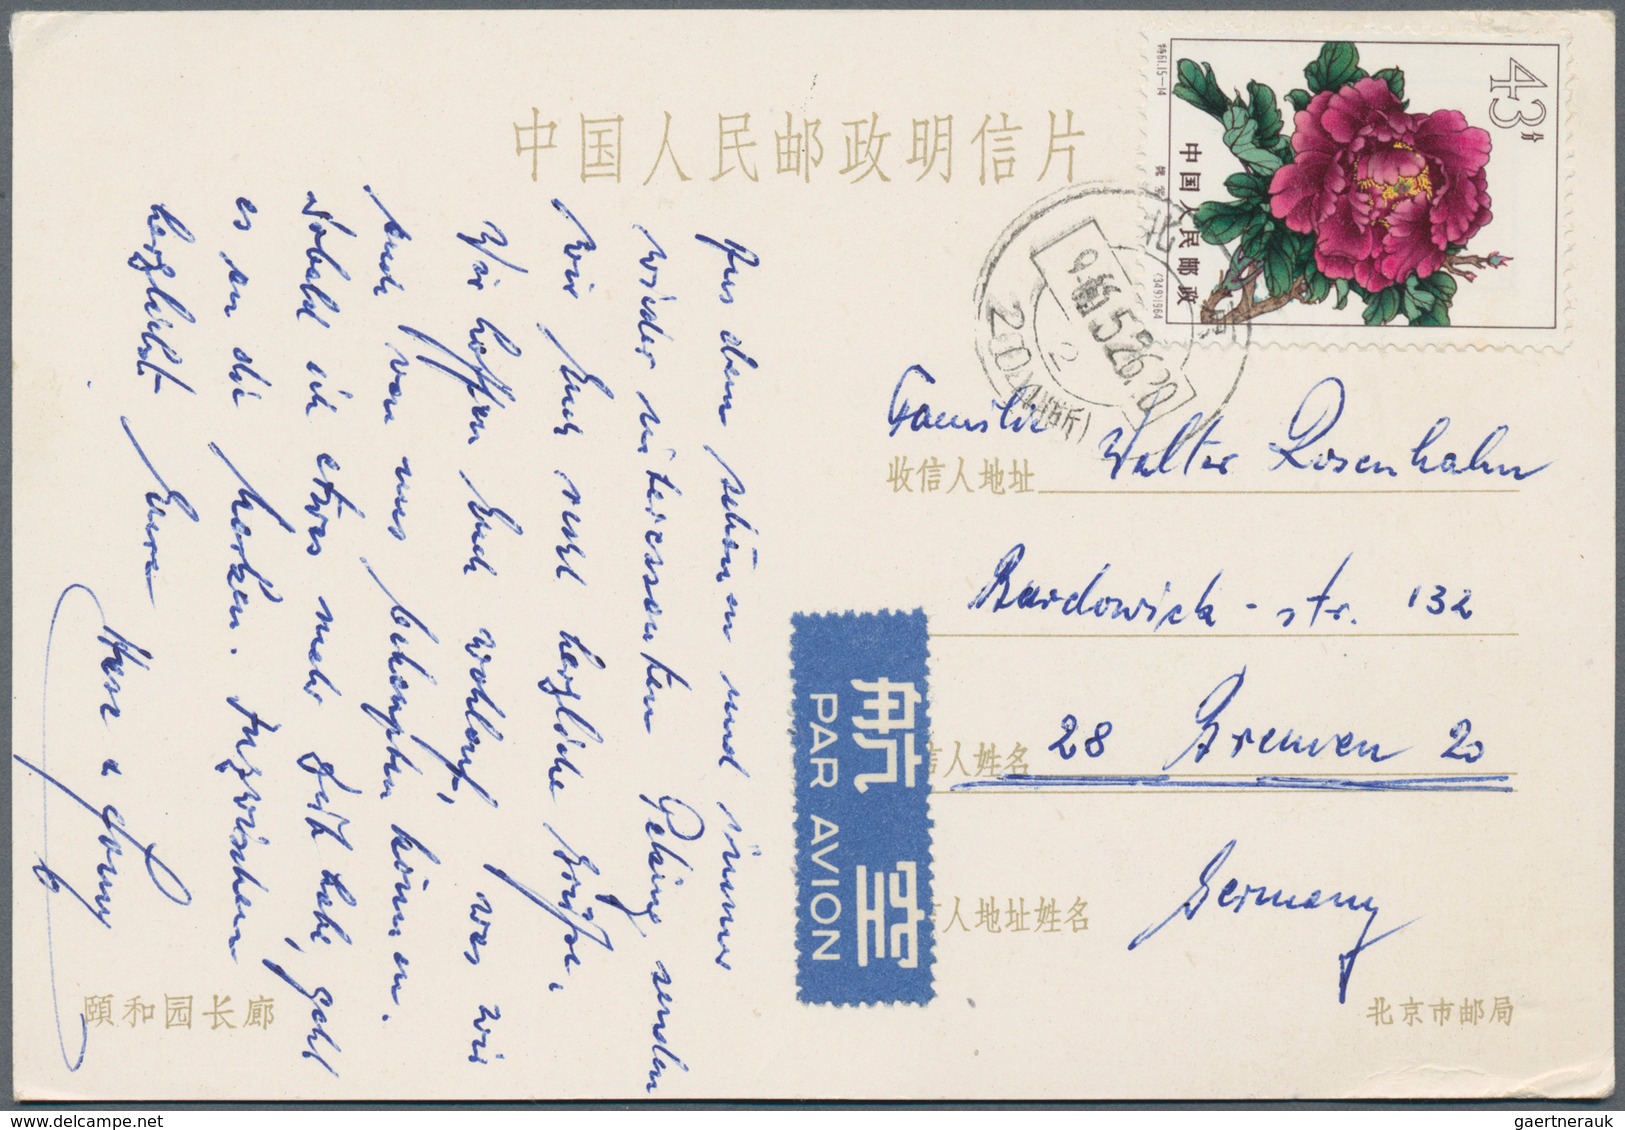 China - Volksrepublik - Ganzsachen: 1960s/70s, 8f. Single Franks On Cover (29) Or Ppc (2) Inc. Some - Postcards